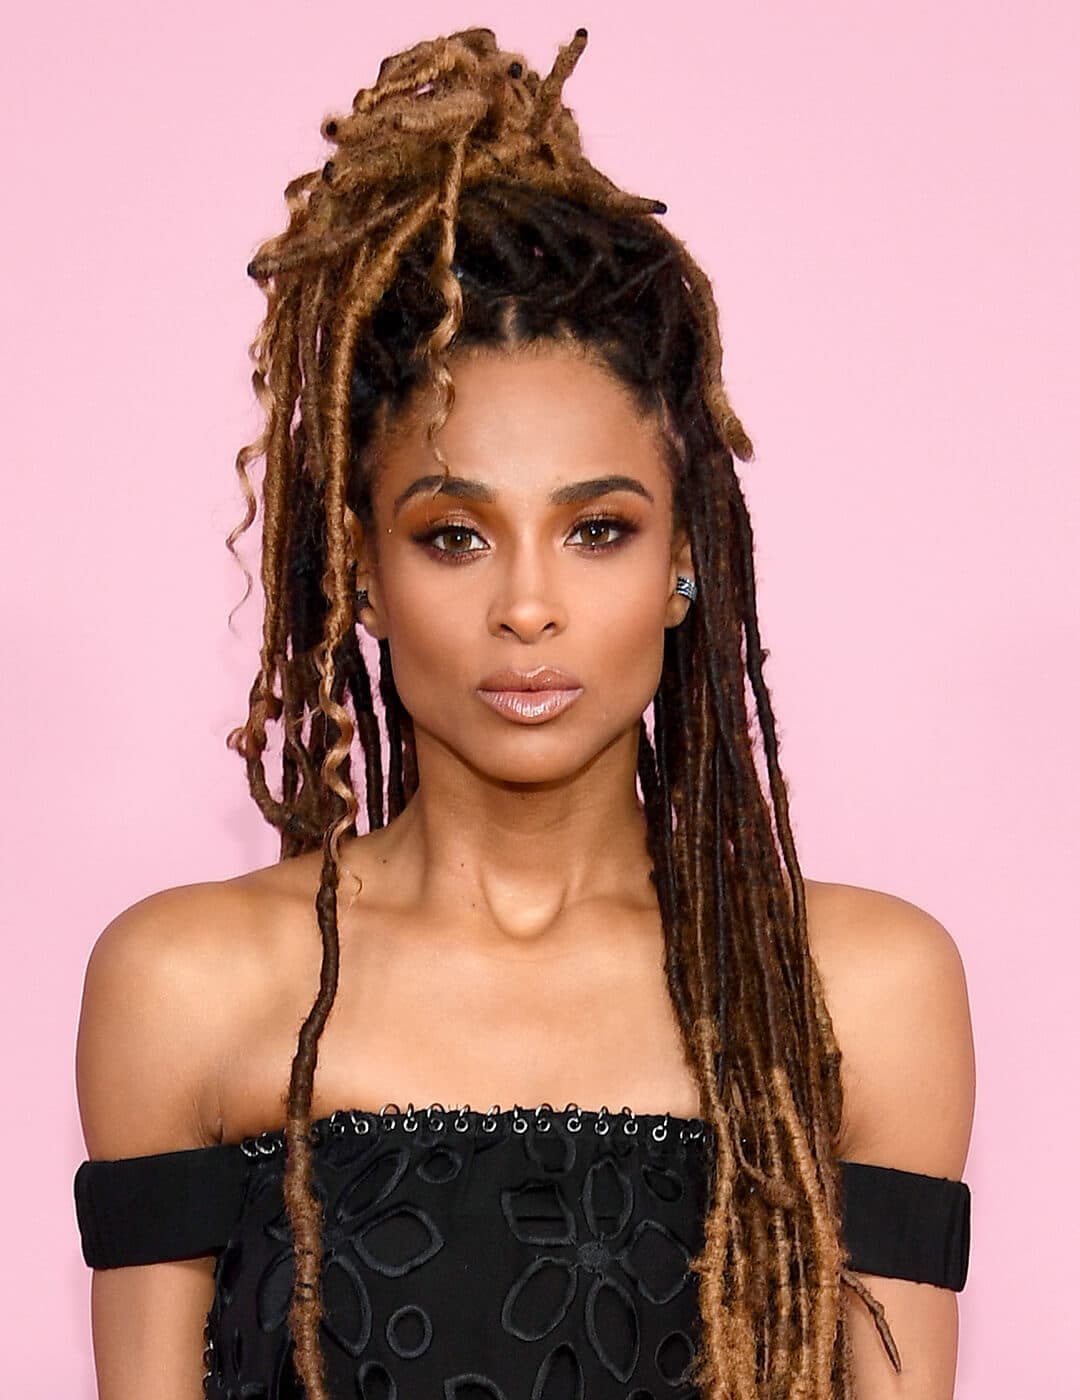 Close-up of Ciara rocking a faux locs half updo hairstyle, smoky eye makeup paired with a nude lipstick, and black dress against pink background